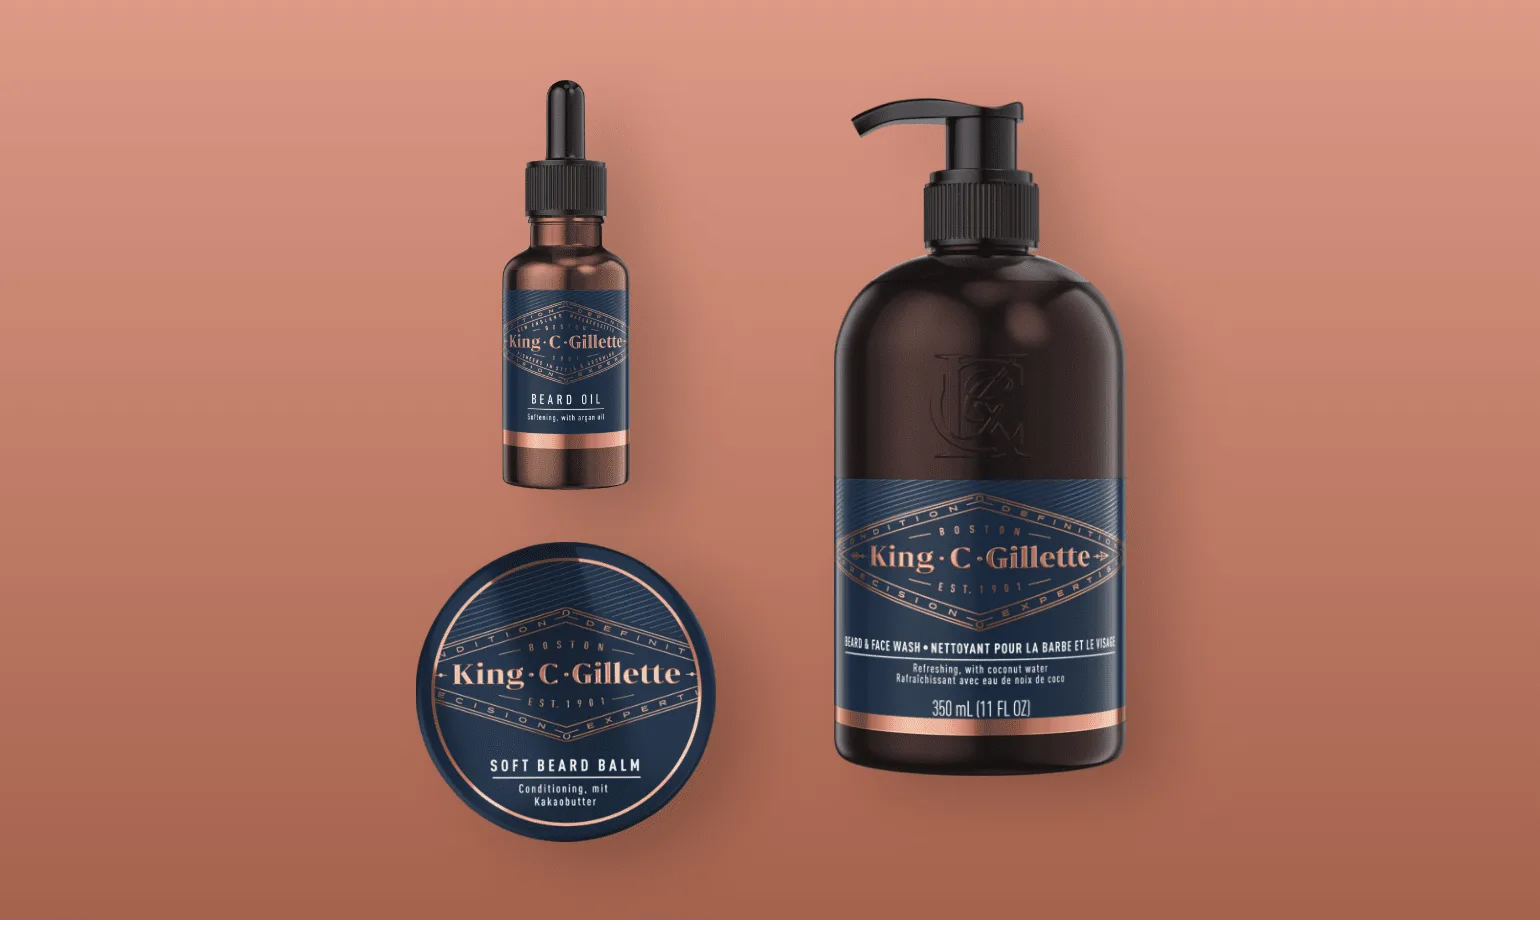 Three King C. Gillette Products For Beard Care